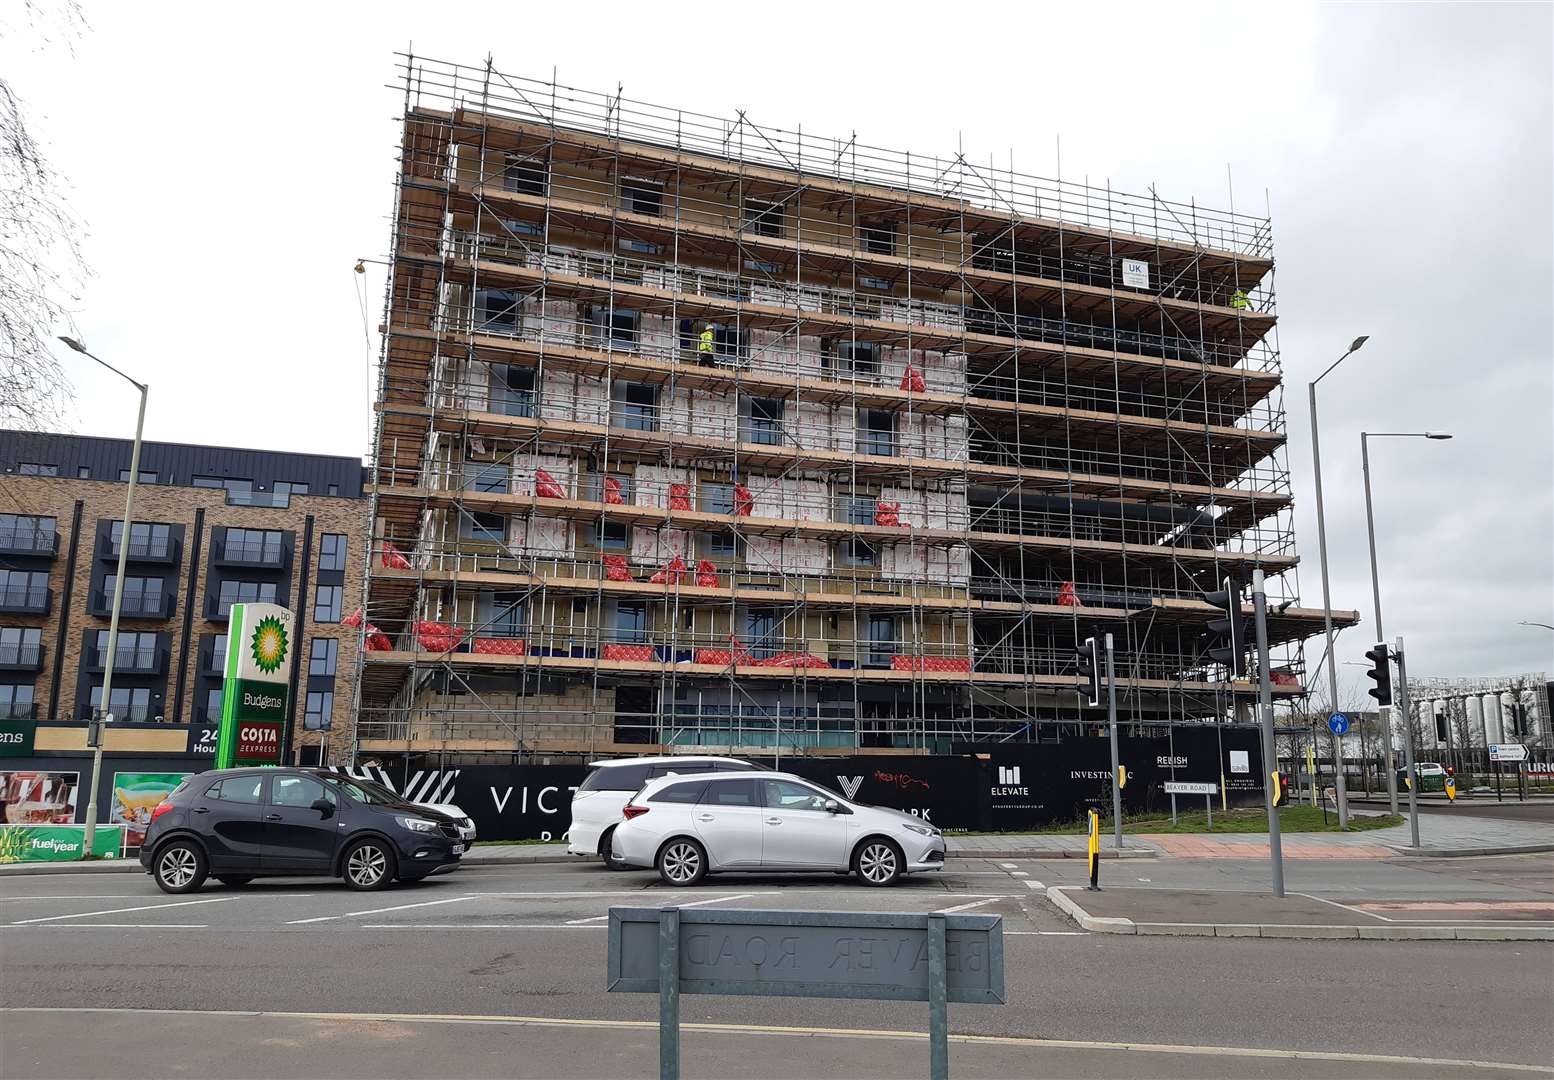 Covid-19 has delayed the construction programme, but bosses are planning to open in the summer